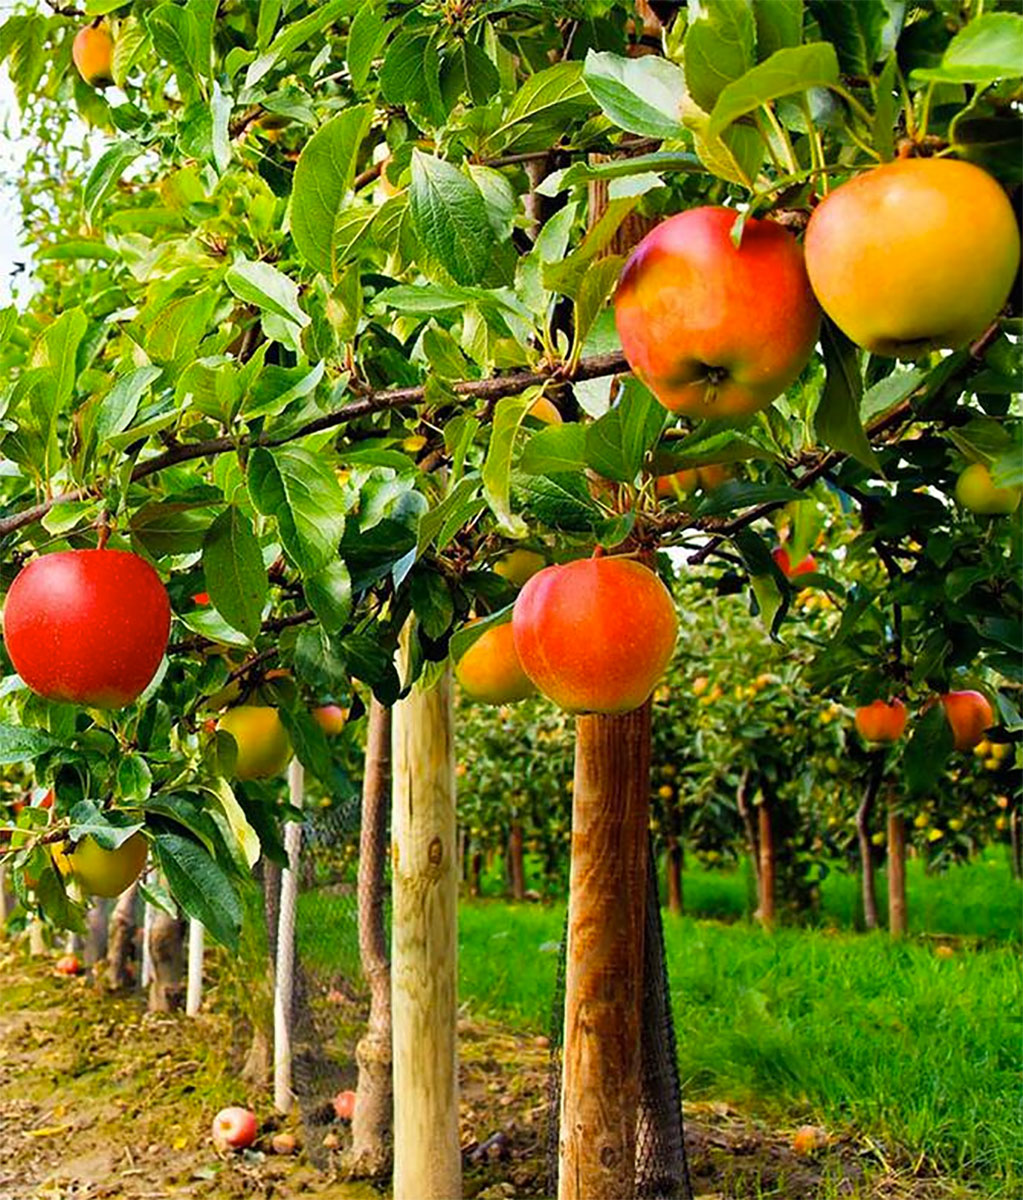 Buy the best fruit trees for your backyard orchard from Grandpa's Orchard fruit tree nursery!